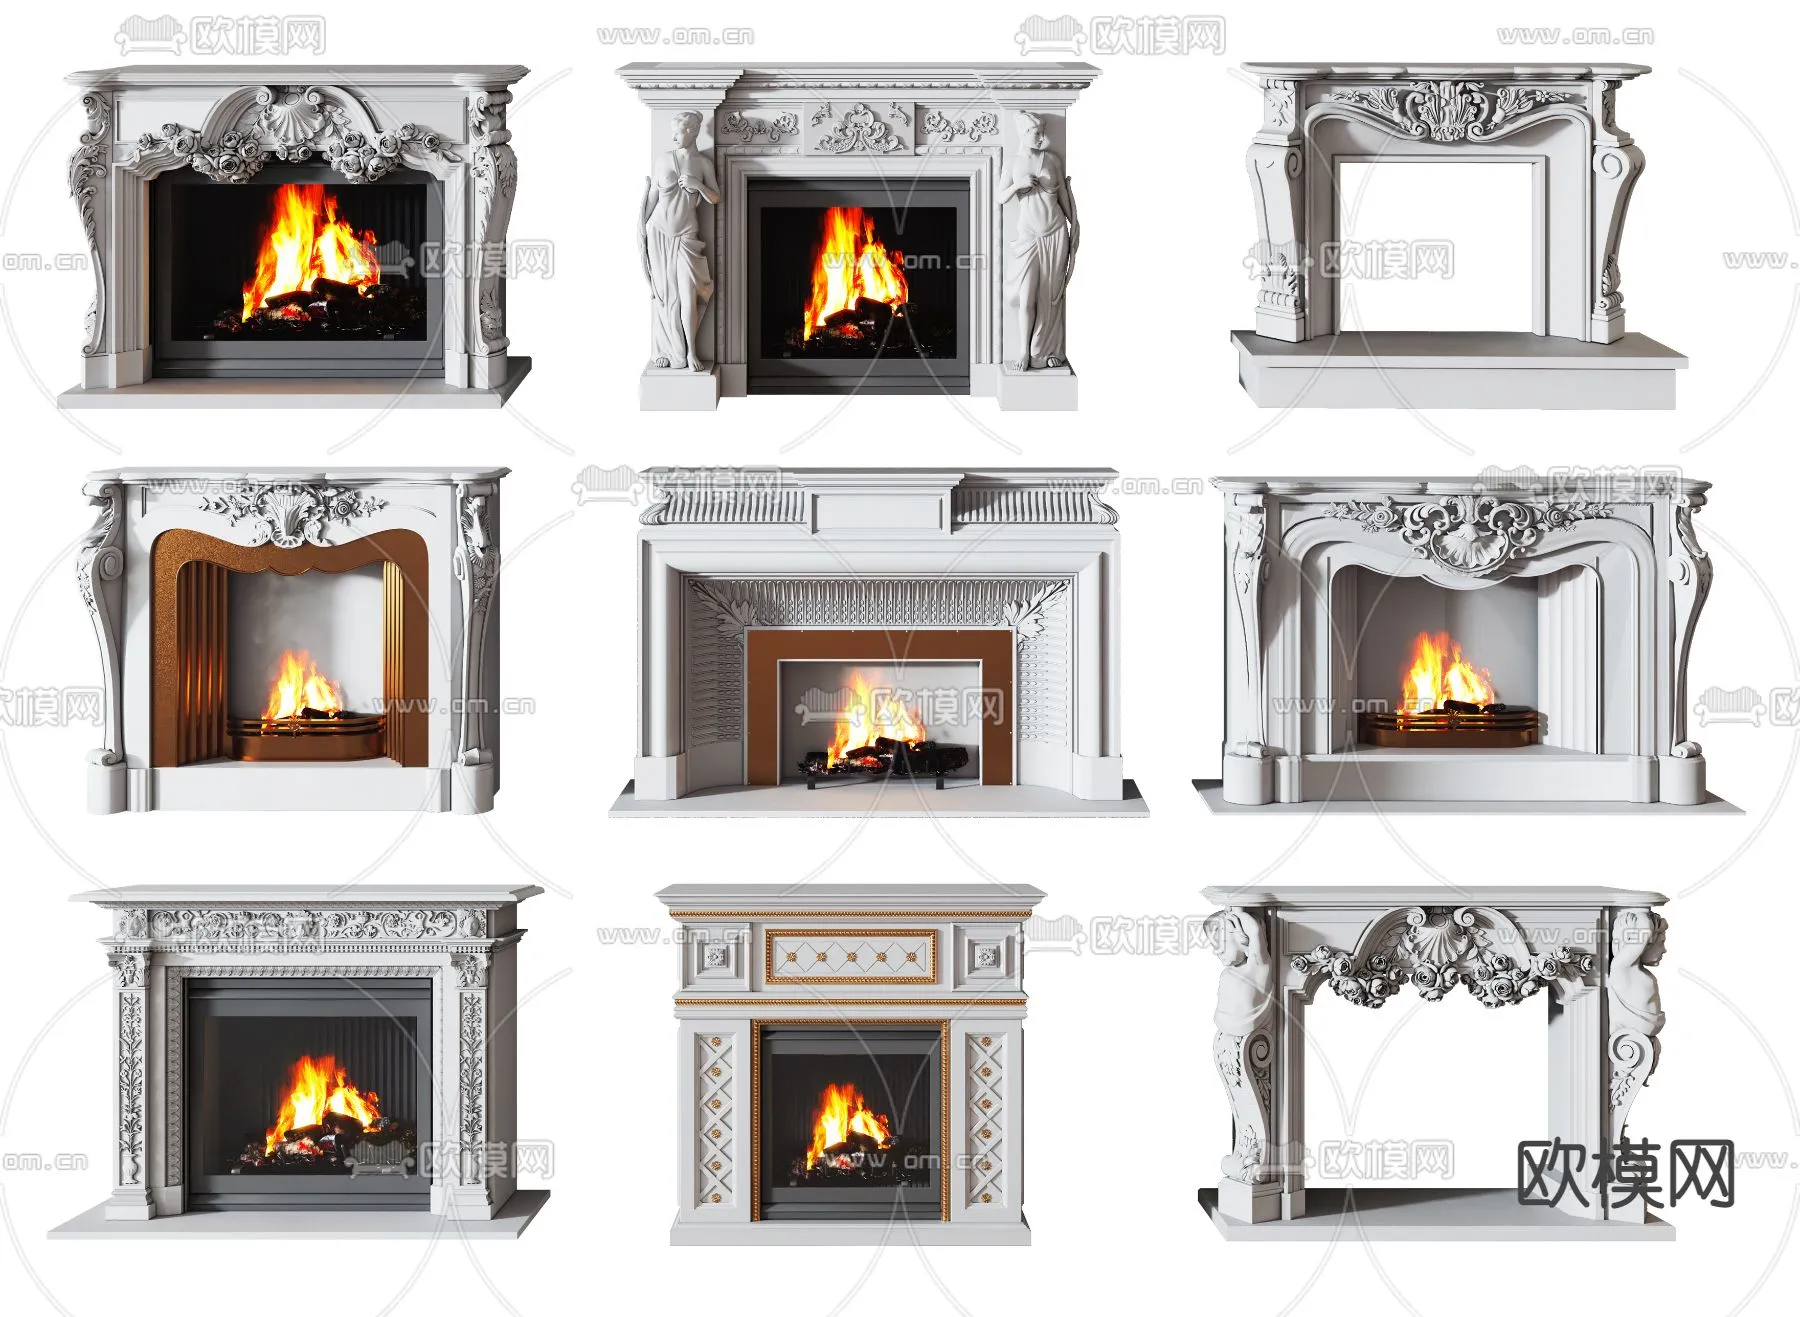 CLASSIC – FIREPLACE 3DMODELS – 070